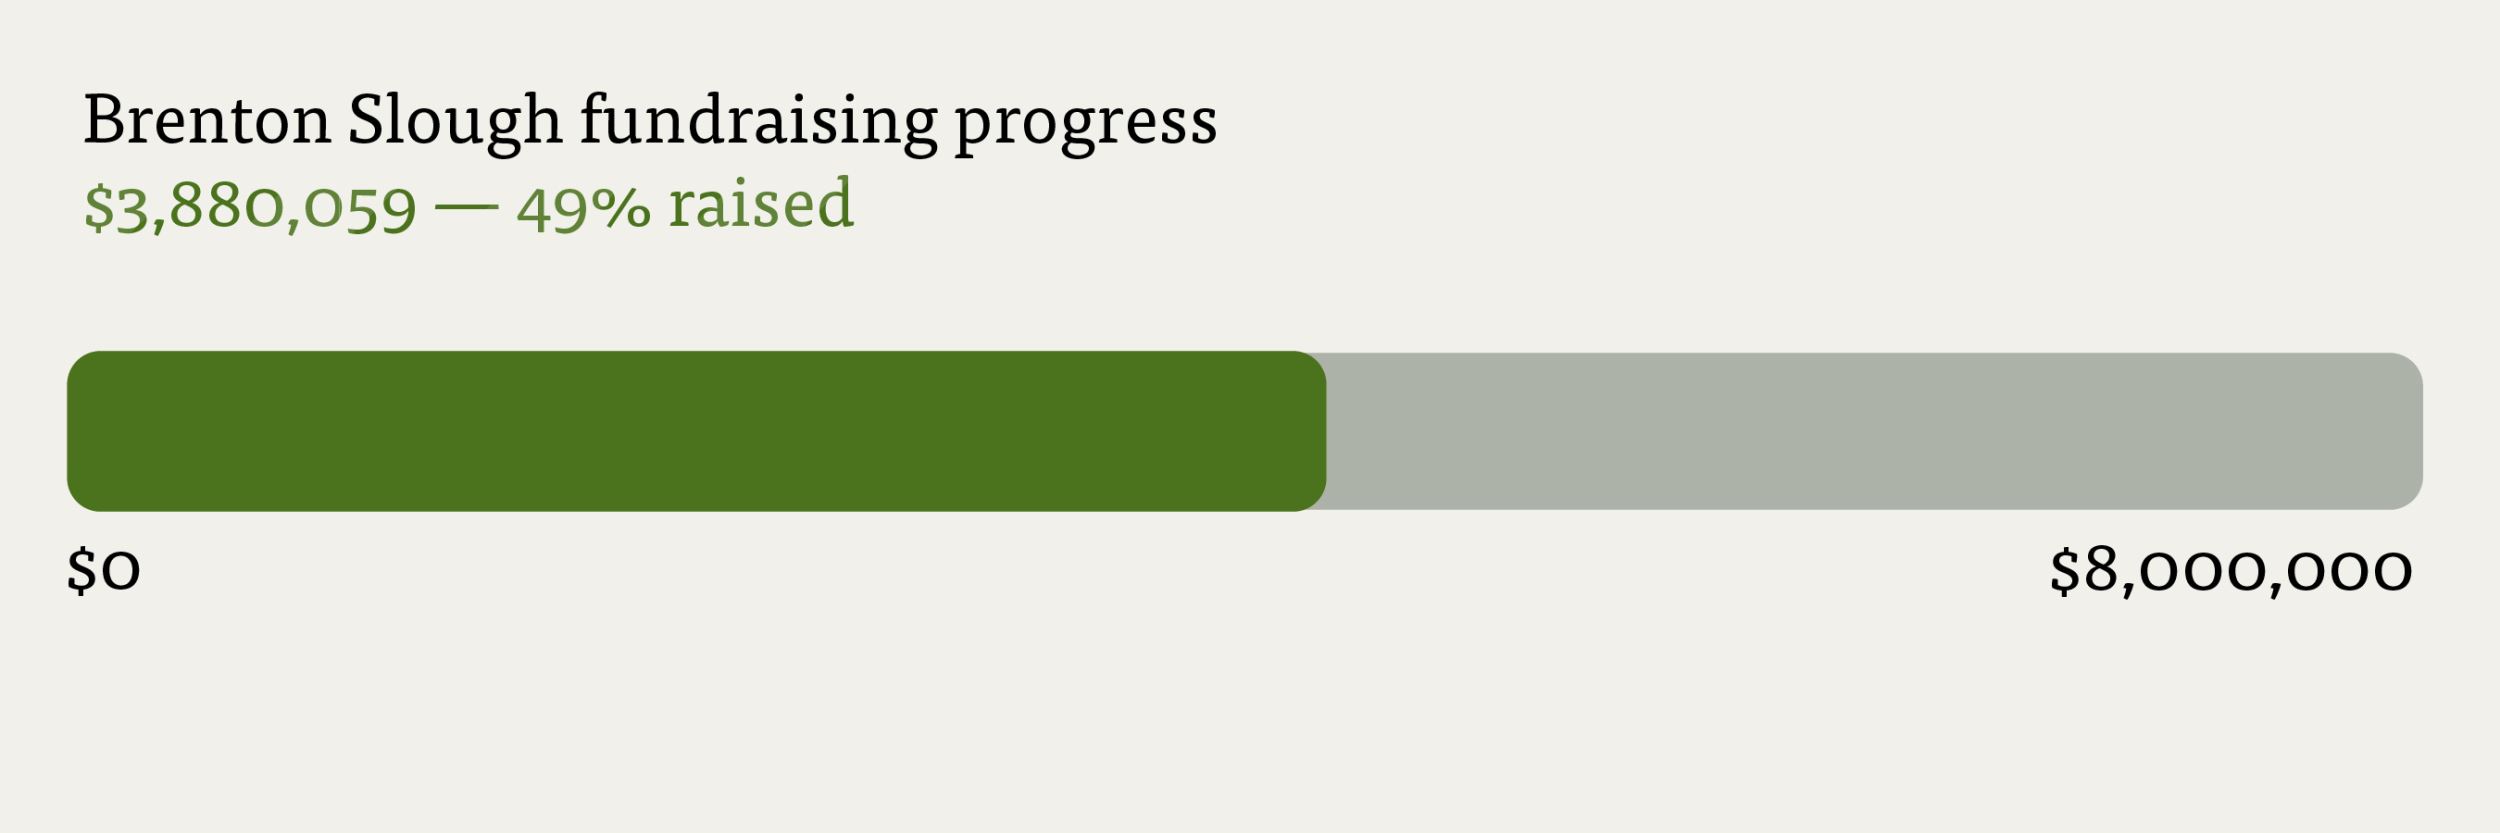 Progress bar showing 49% of funds raised